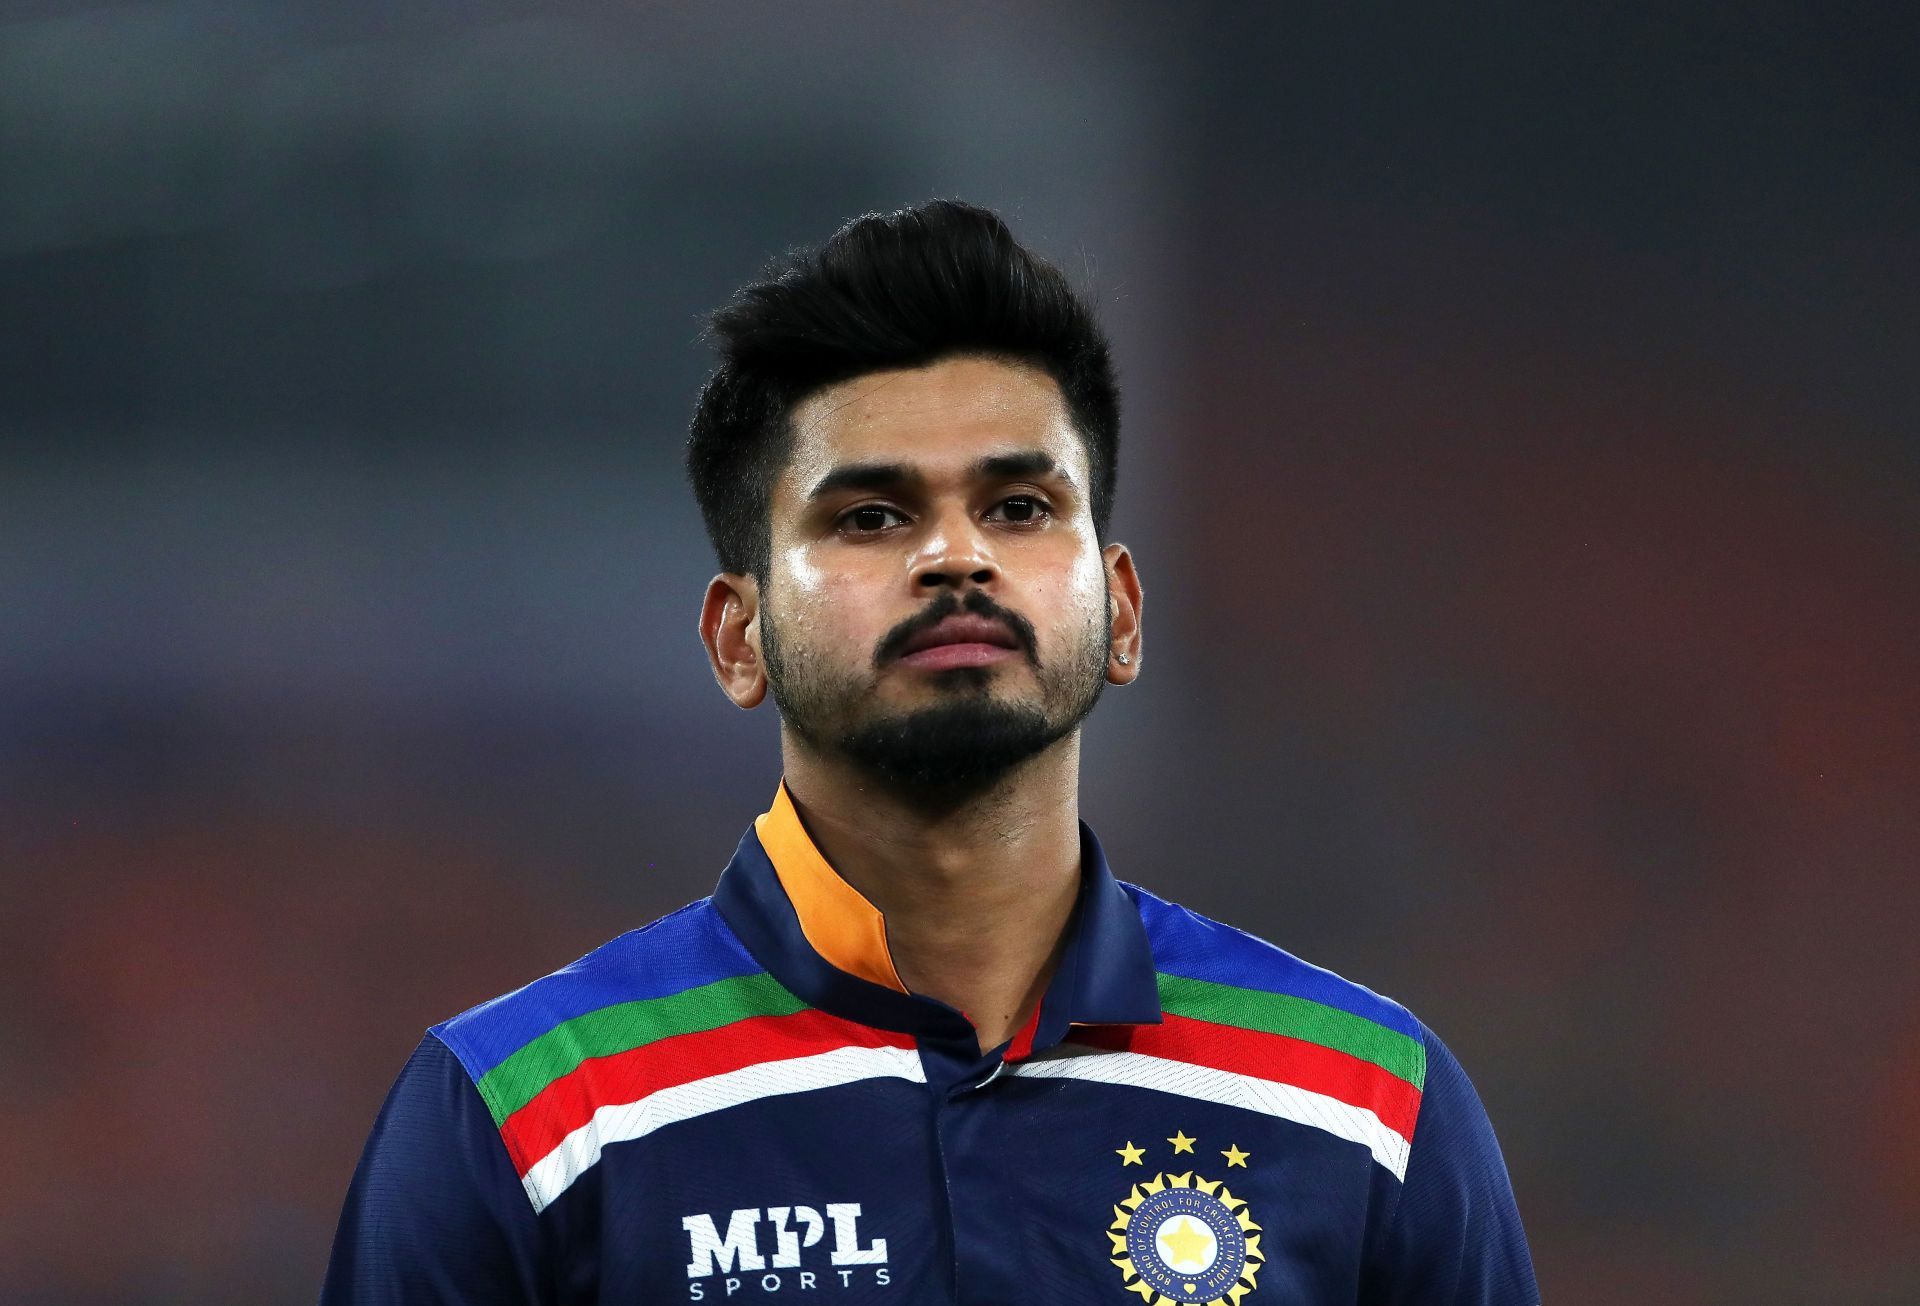 Shreyas Iyer is likely to bat at No.3 in the T20I series against Sri Lanka